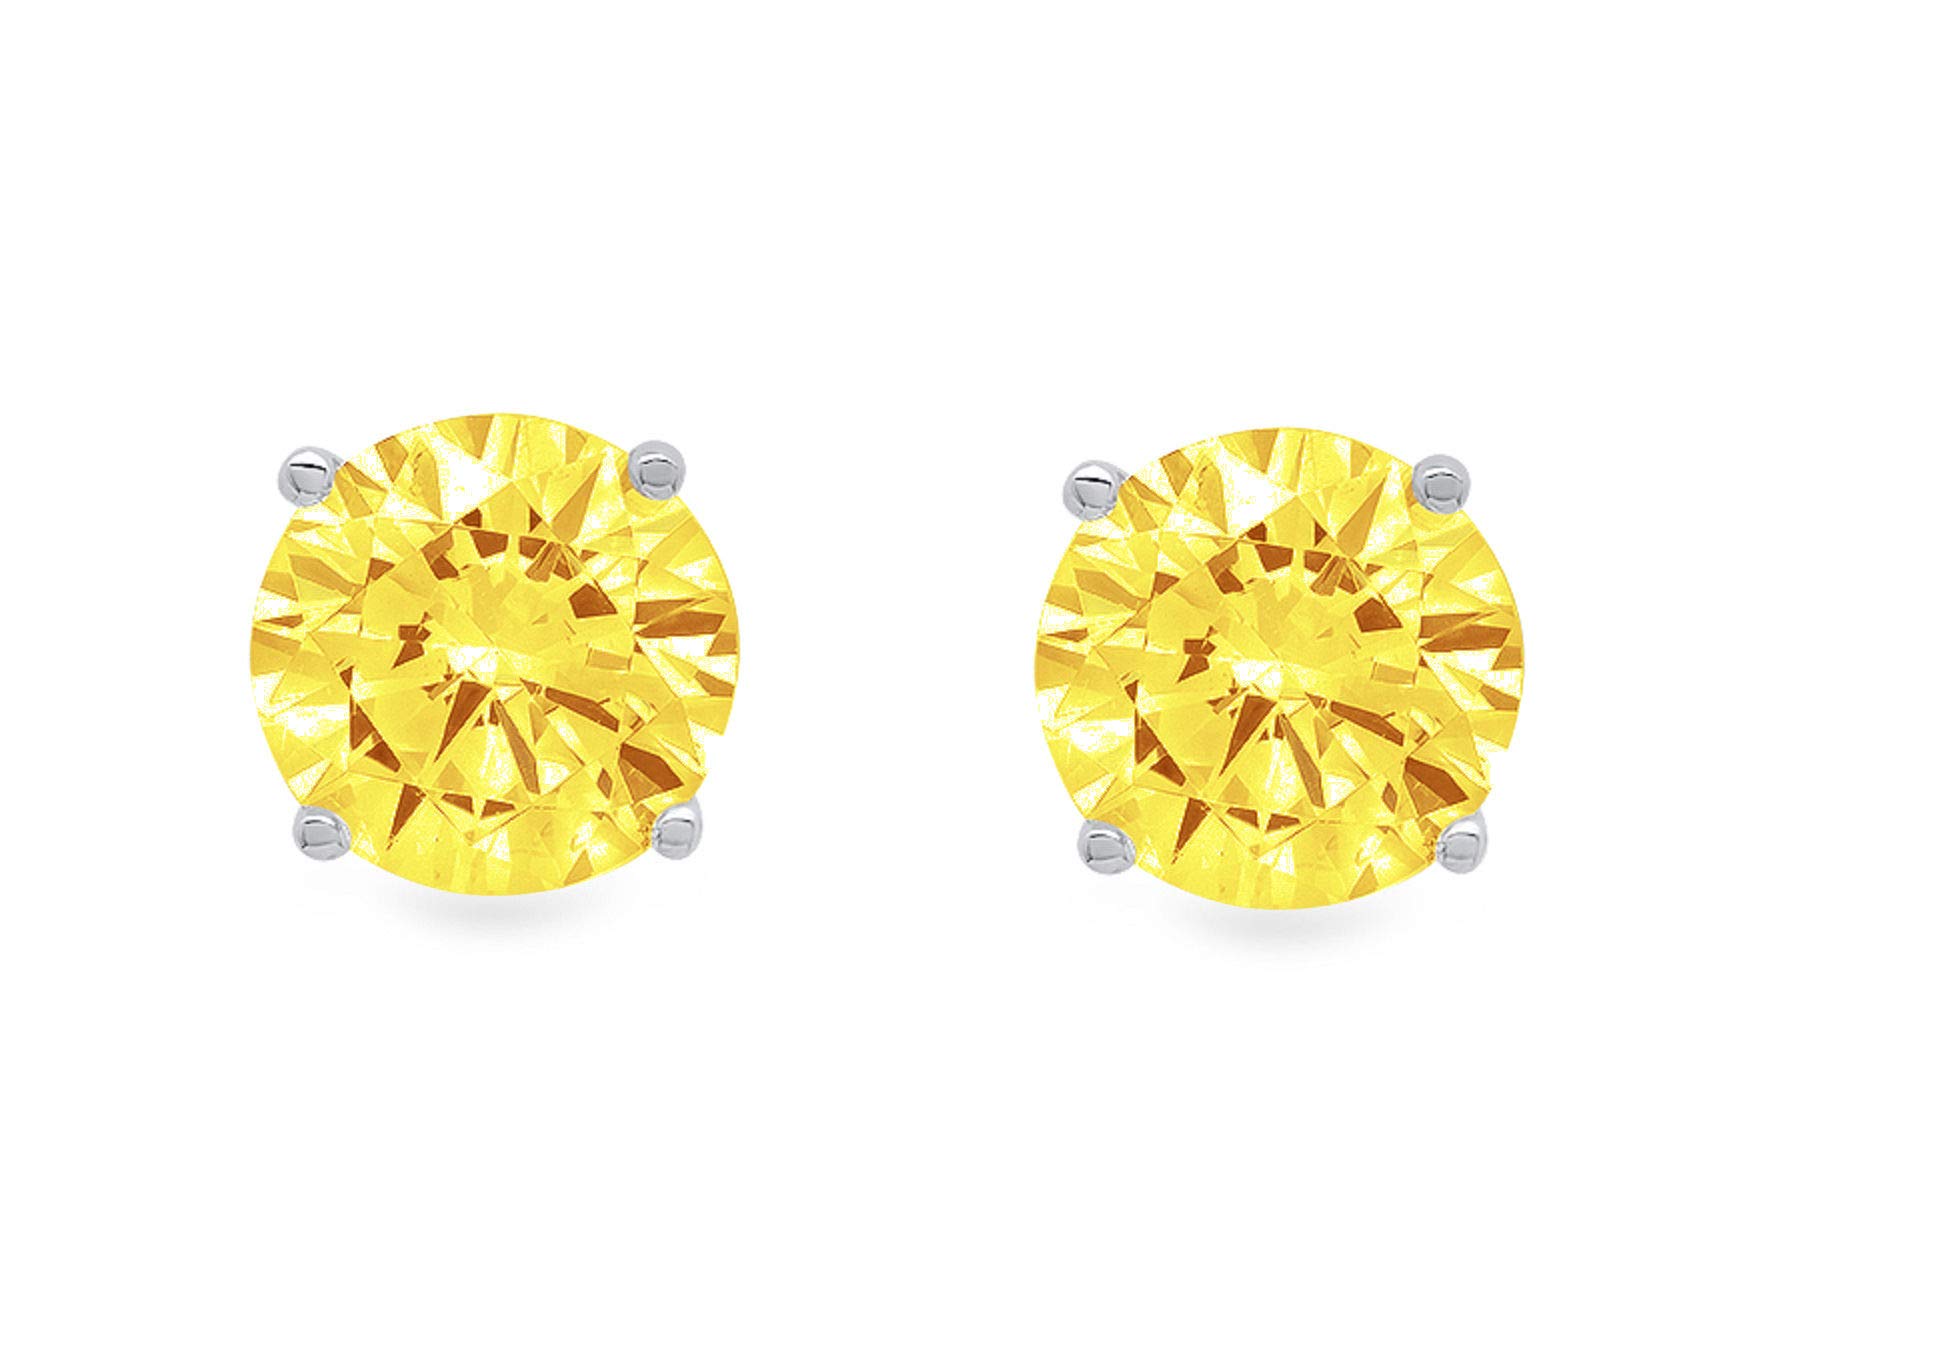 Clara Pucci 0.20 ct Brilliant Round Cut Solitaire Genuine Flawless Yellow Simulated Diamond Gemstone Pair of Stud Earrings Solid 18K White Gold Butterfly Push Back